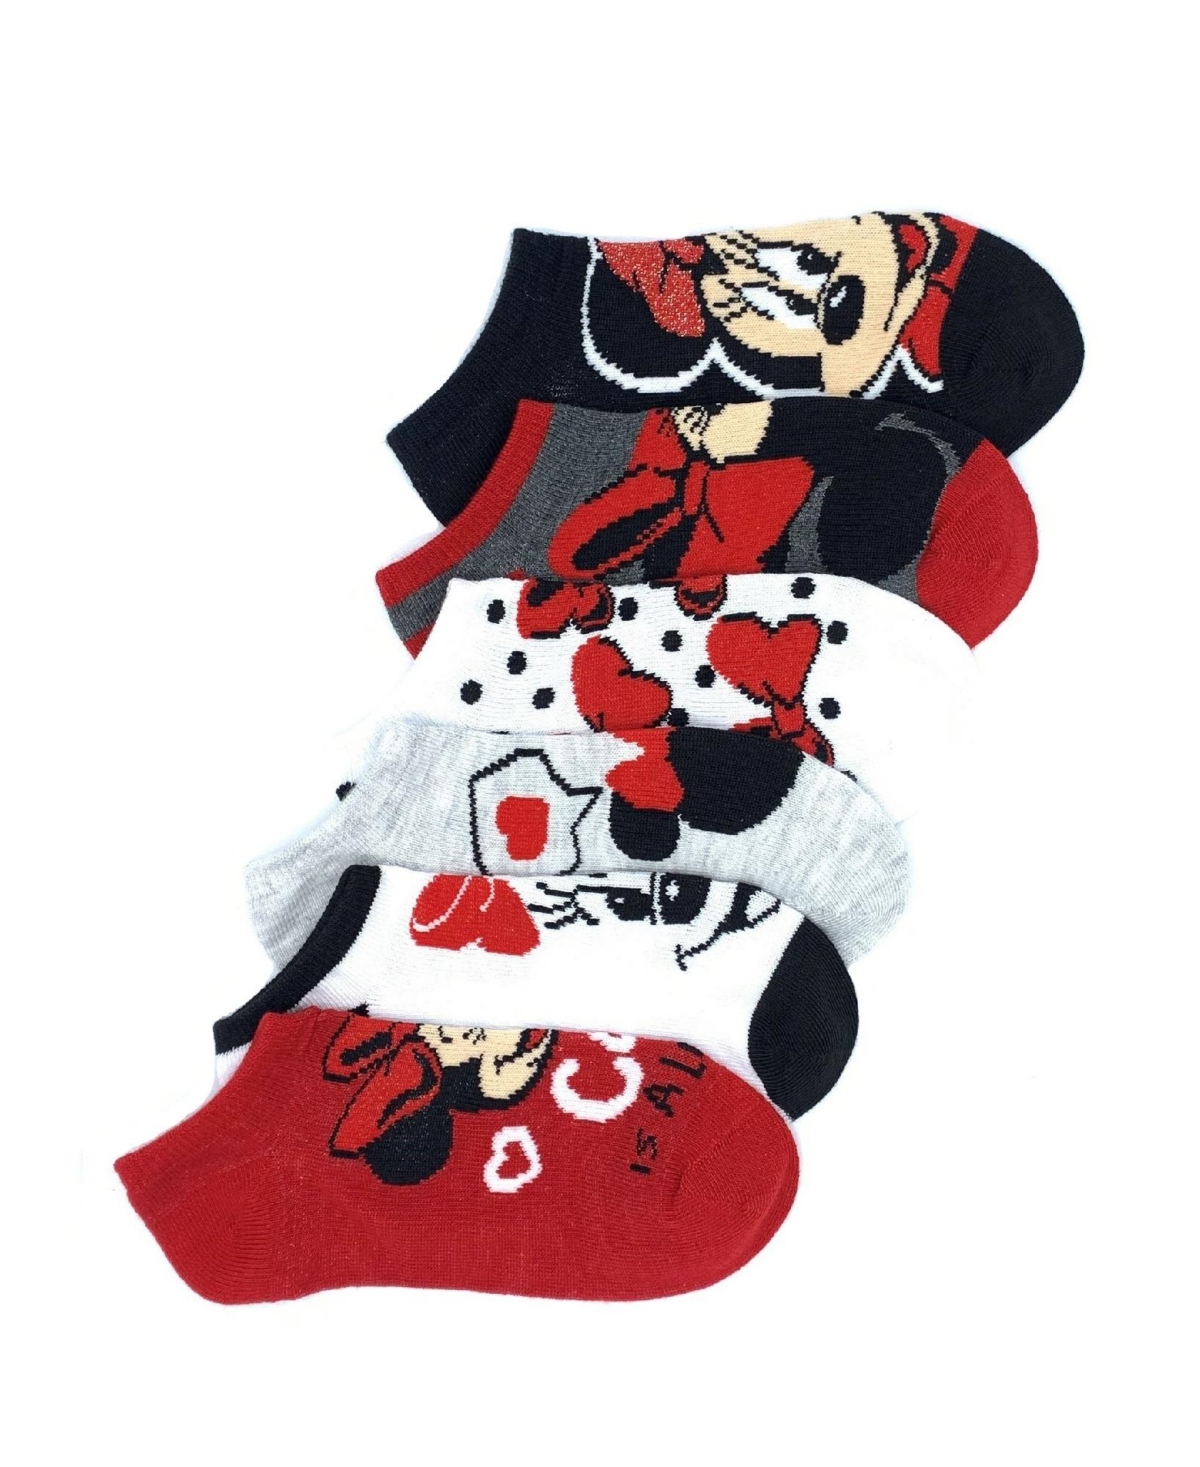 Minnie Mouse Big Girls No Show Socks, Pair Of 6 In Black